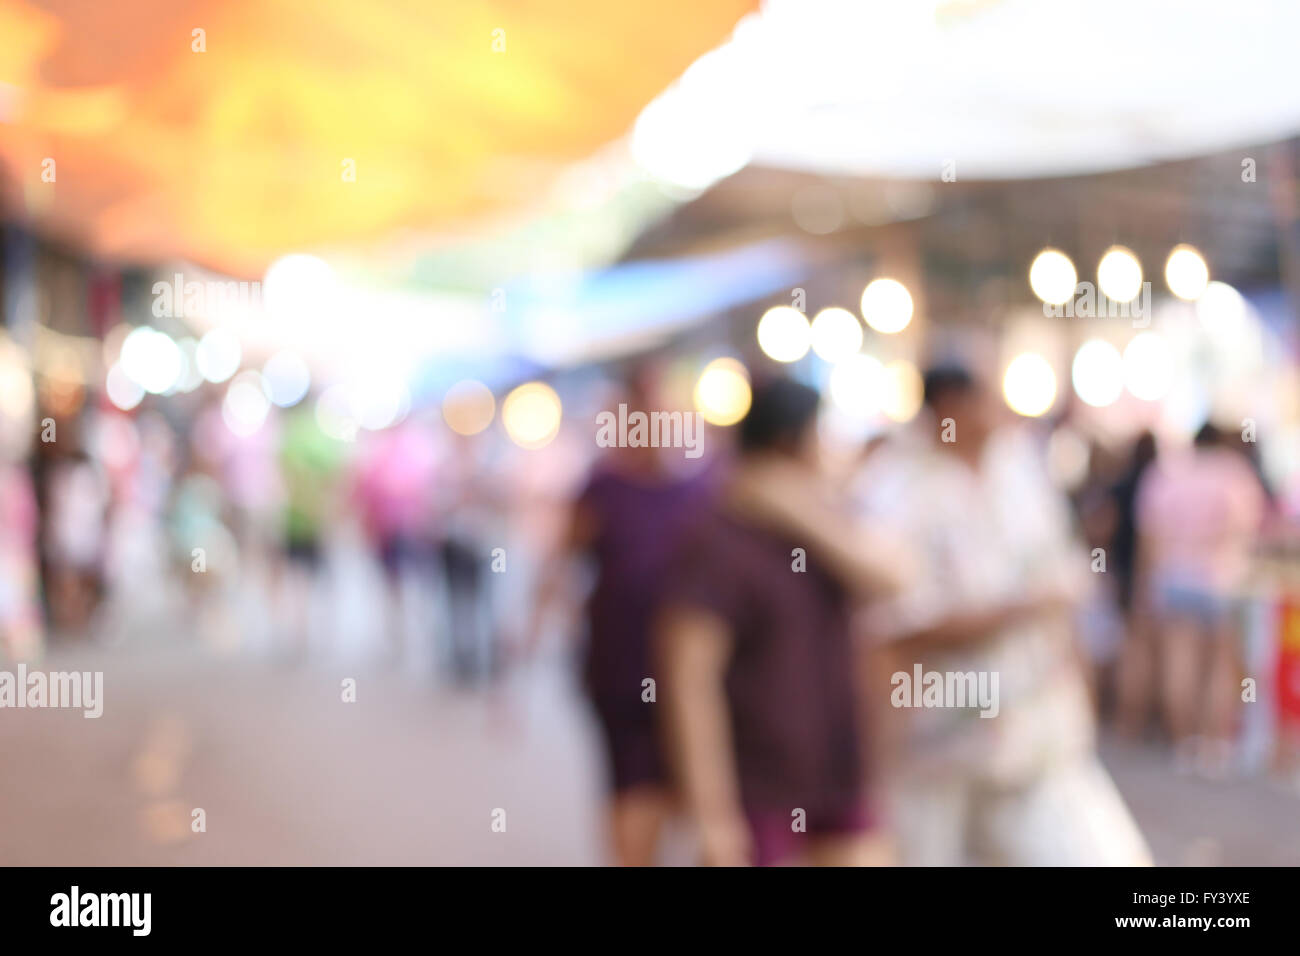 Market of purchase in a blur style for abstract design. Stock Photo